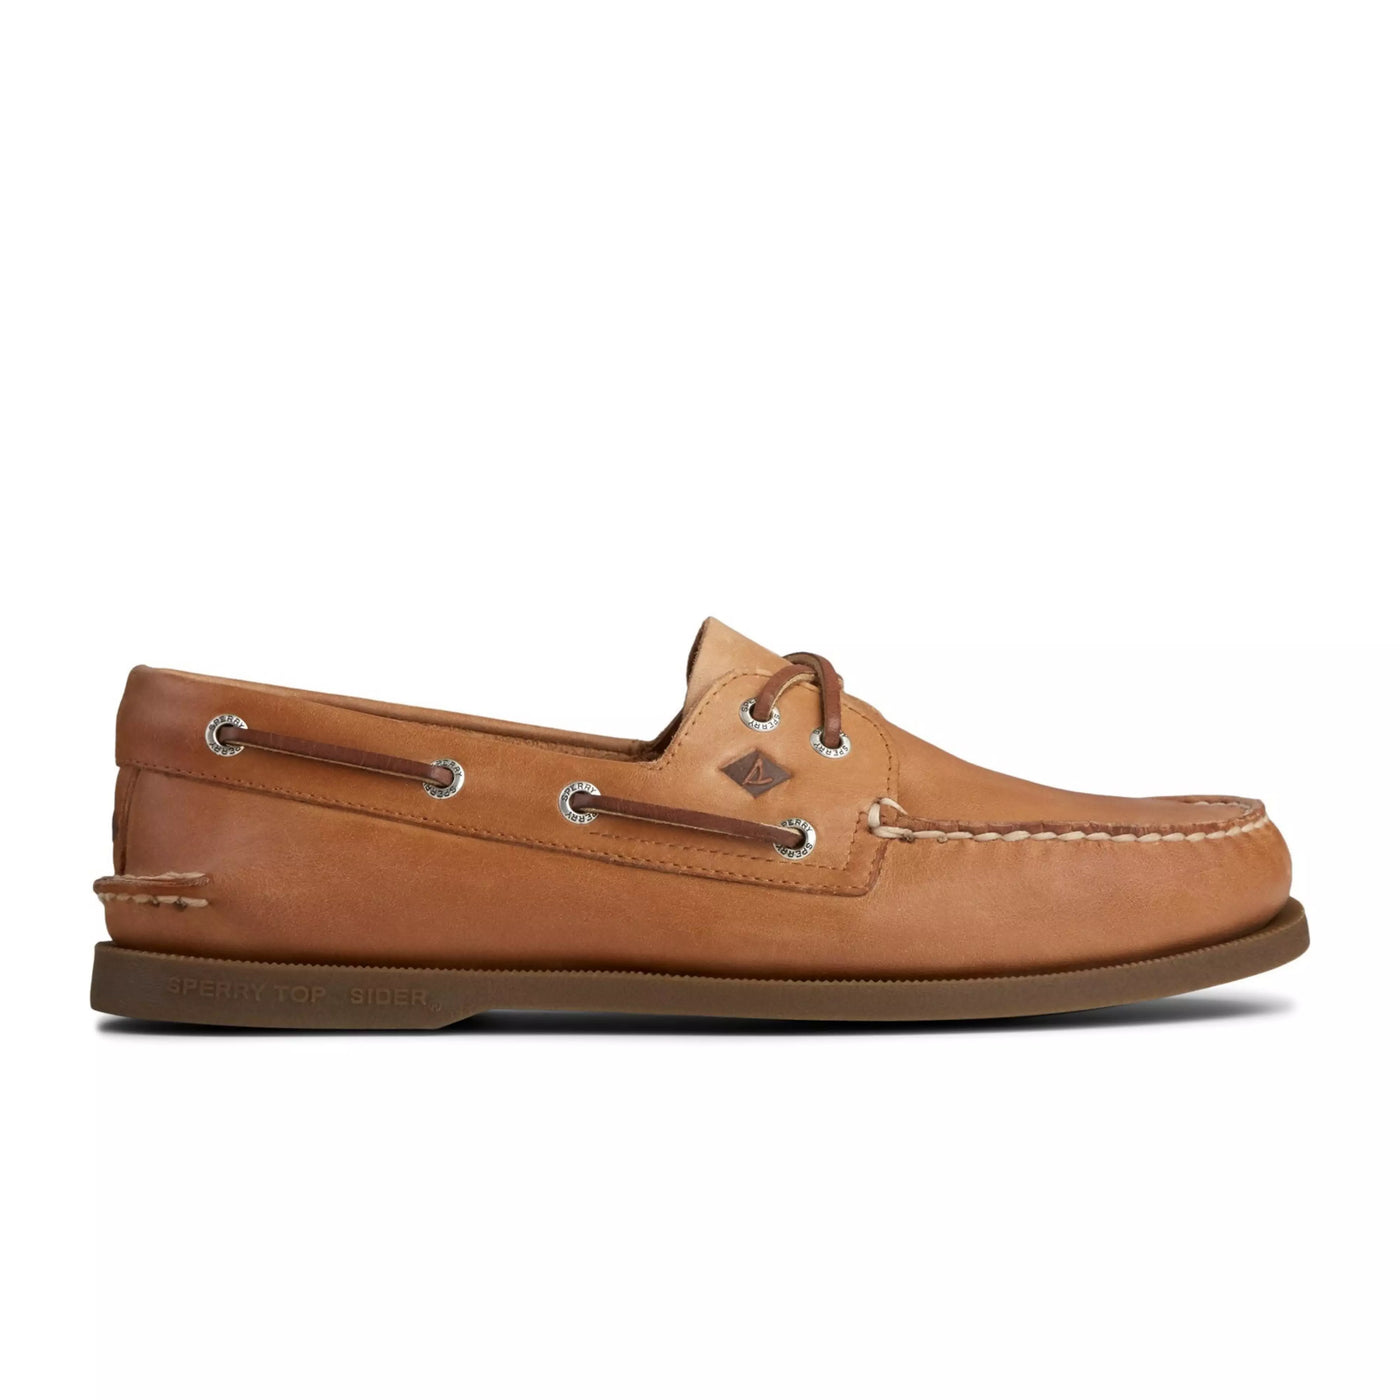 Nutmeg Authentic Original Leather Boat Shoe - Sperry - The Slipper Box